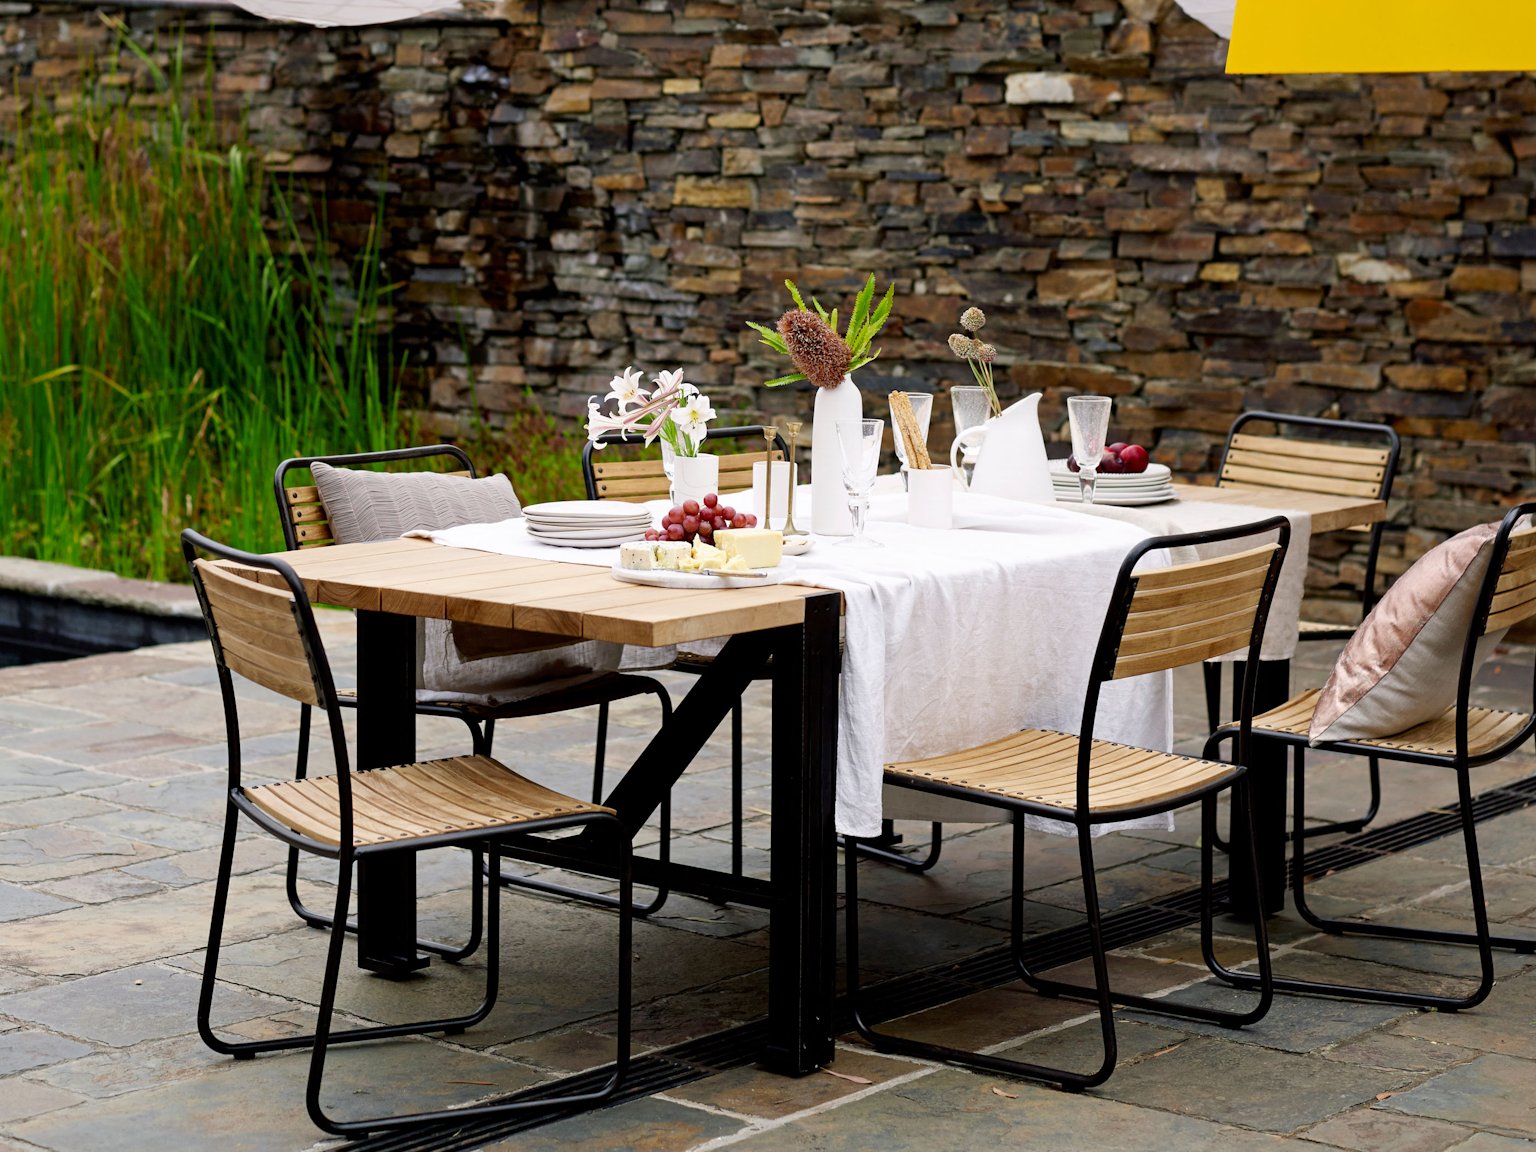 Turon dining chairs with Colo dining table in outdoor dining area with Badger dry stone walling 